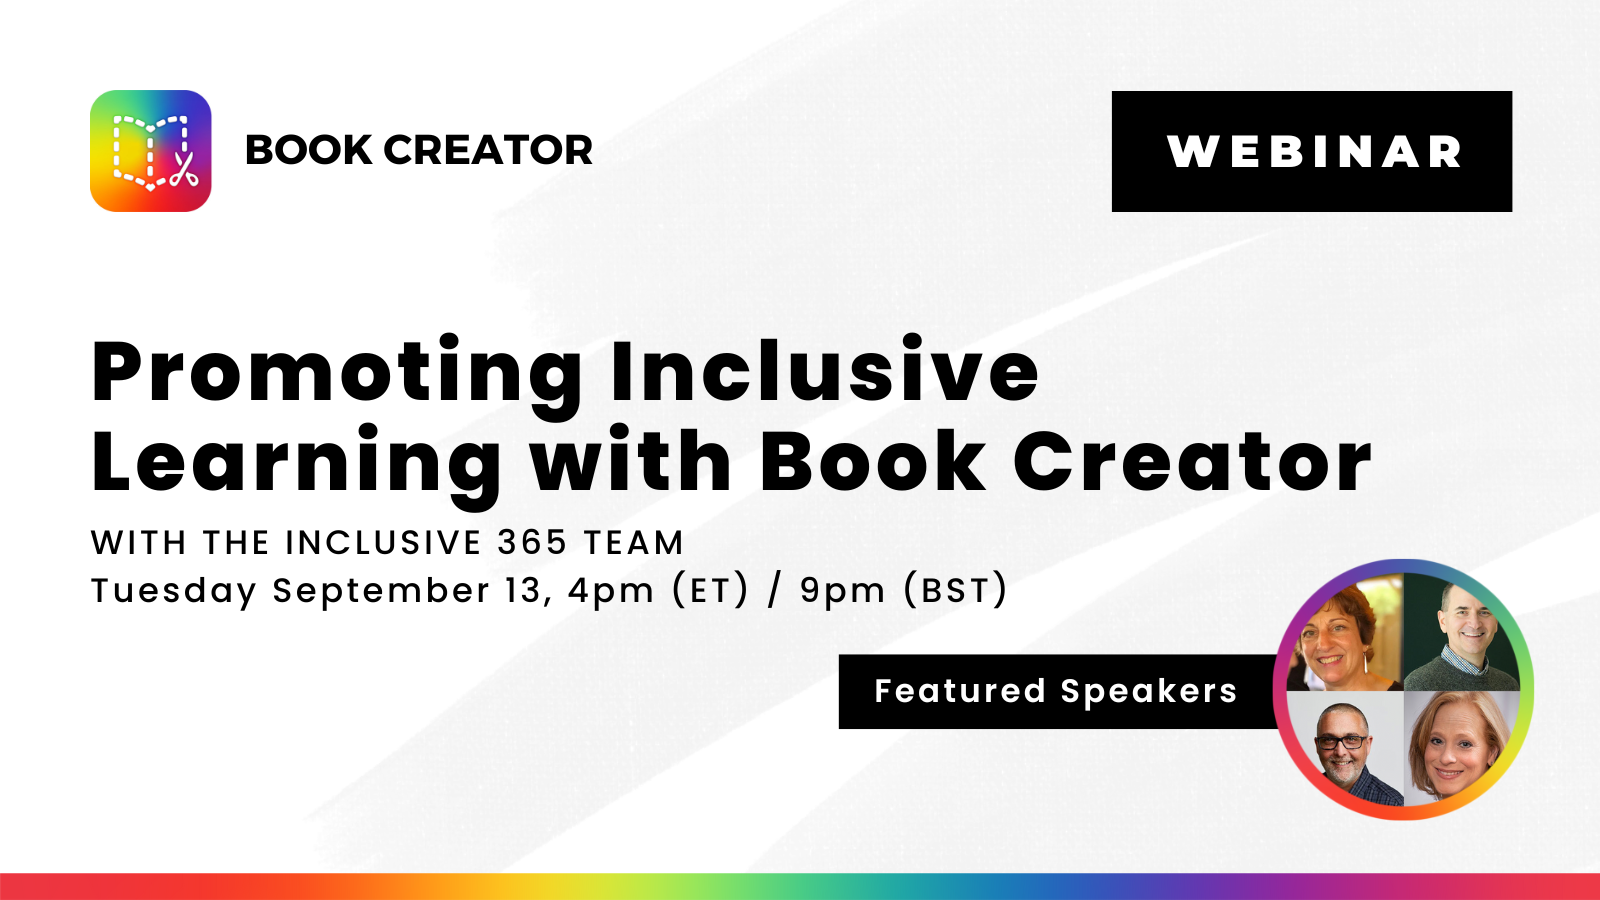 Book Creator Promoting Inclusive Learning with Book Creator with the Inclusive 365 Team Tuesday September 13, 4pm EST